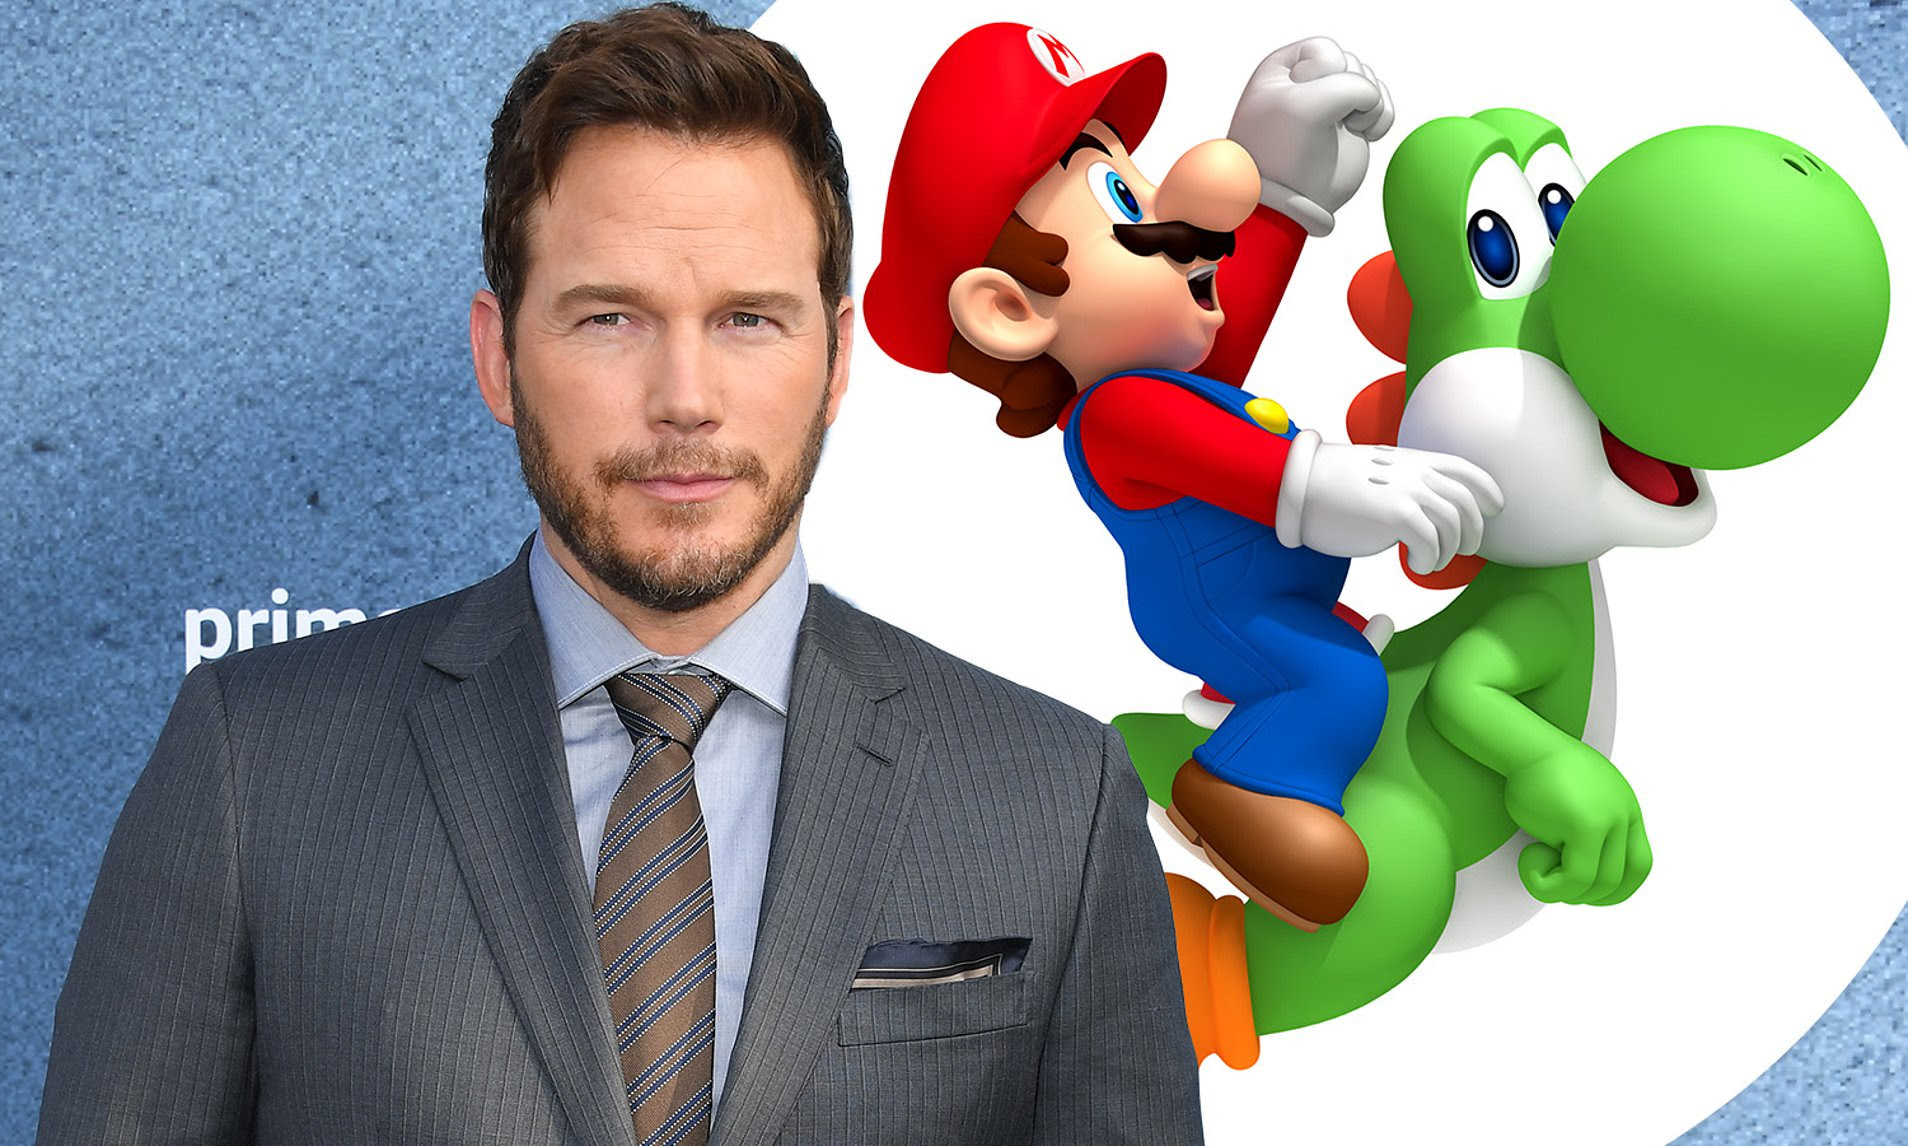 Chris Pratt on controversy over role as Mario in Super Mario Bros. film as he's not Italian